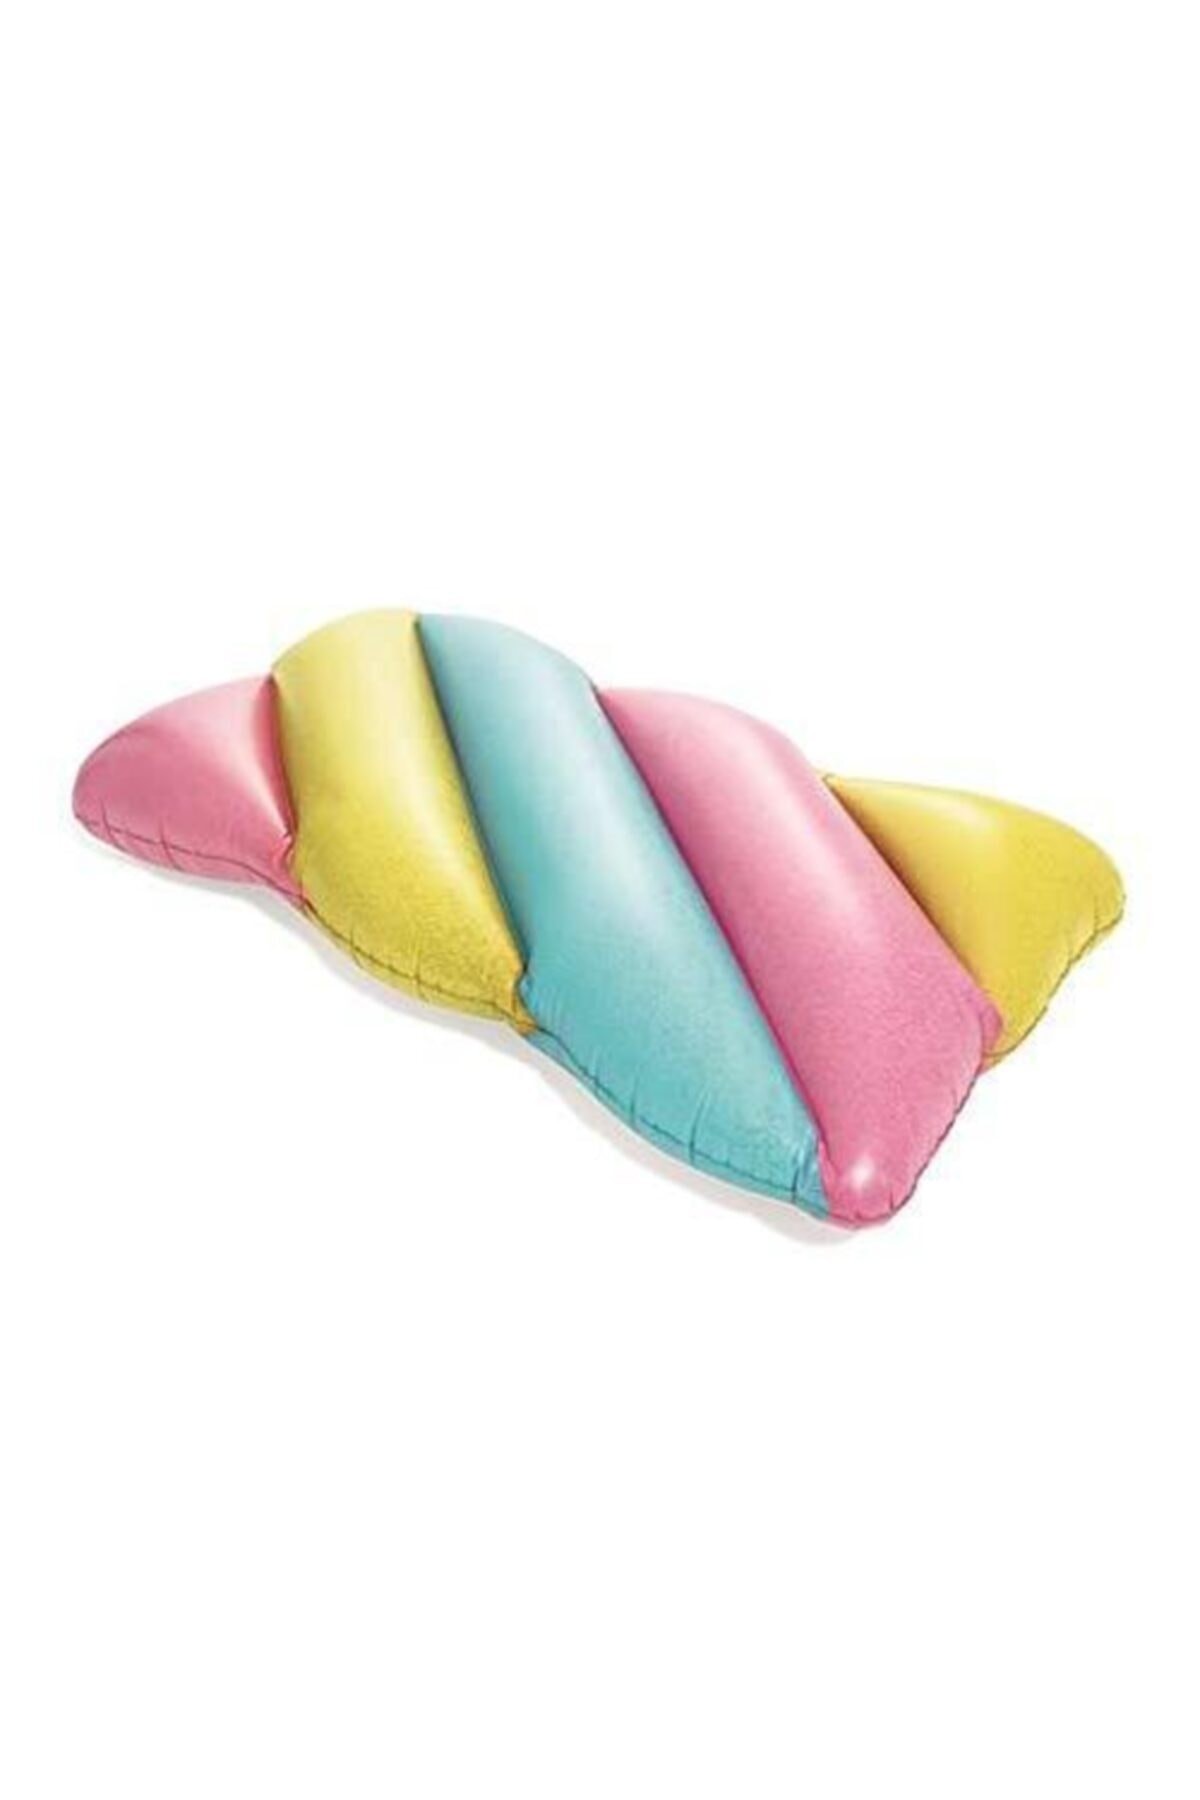 Sea Bed Candy Bed 190x105 Cm Bestway - 43187